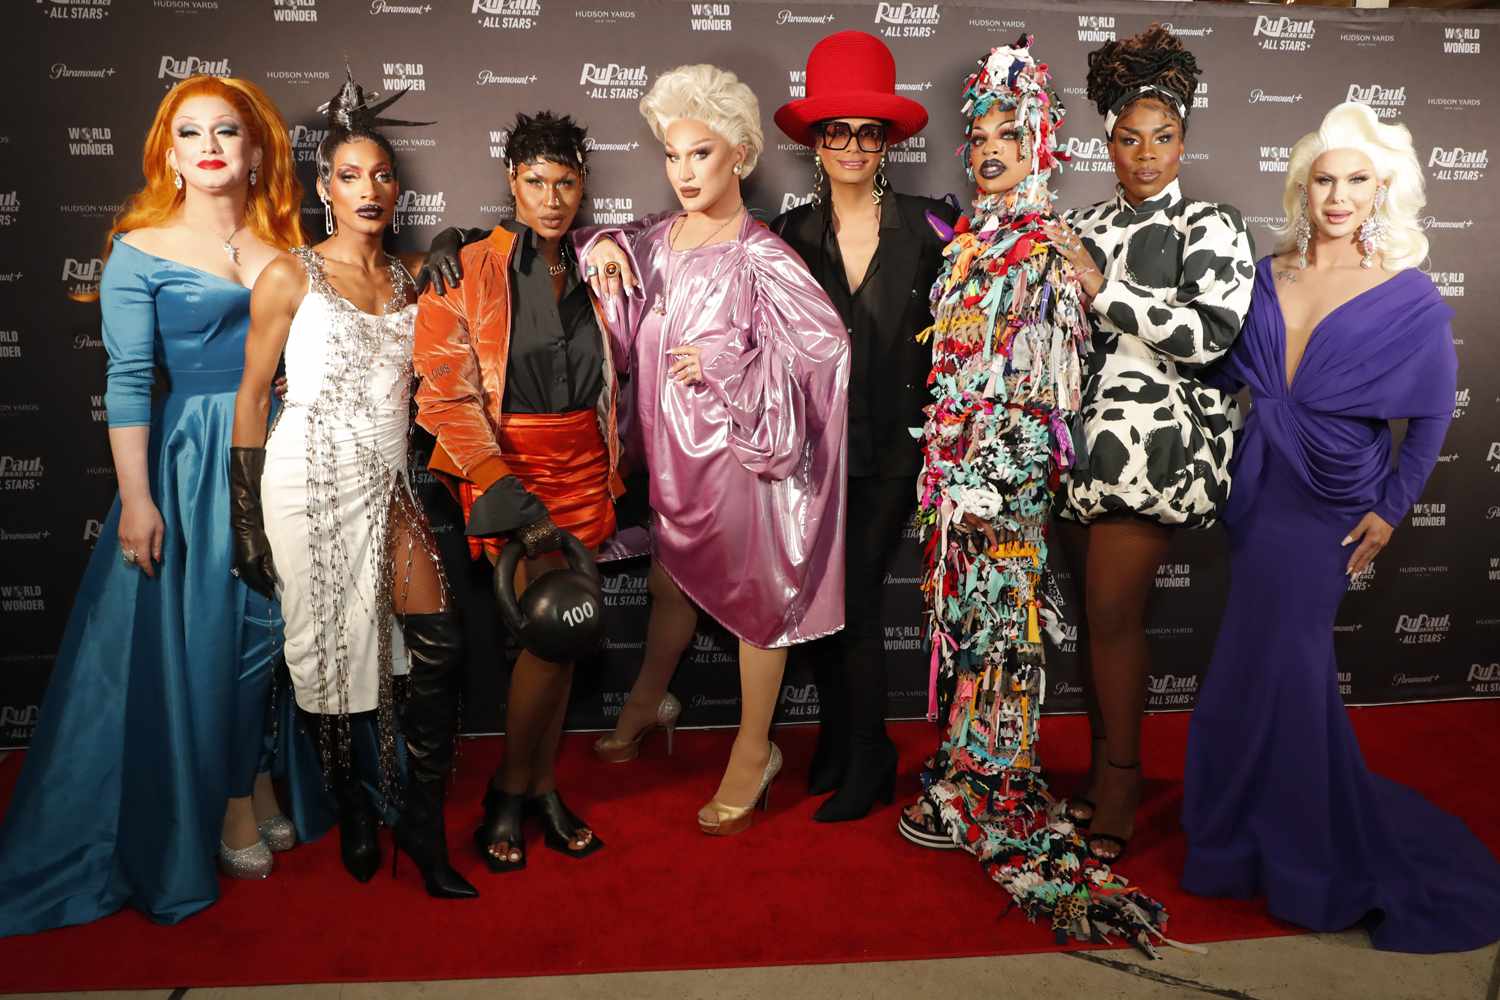 Jinkx Monsoon, Jaida Essence Hall, Shea Couleé, The Vivienne, Raja, Yvie Oddly, Monét X Change, and Trinity the Tuck attend RuPaul's Drag Race All Stars 7 Premiere screening + panel discussion St Hudson Yards